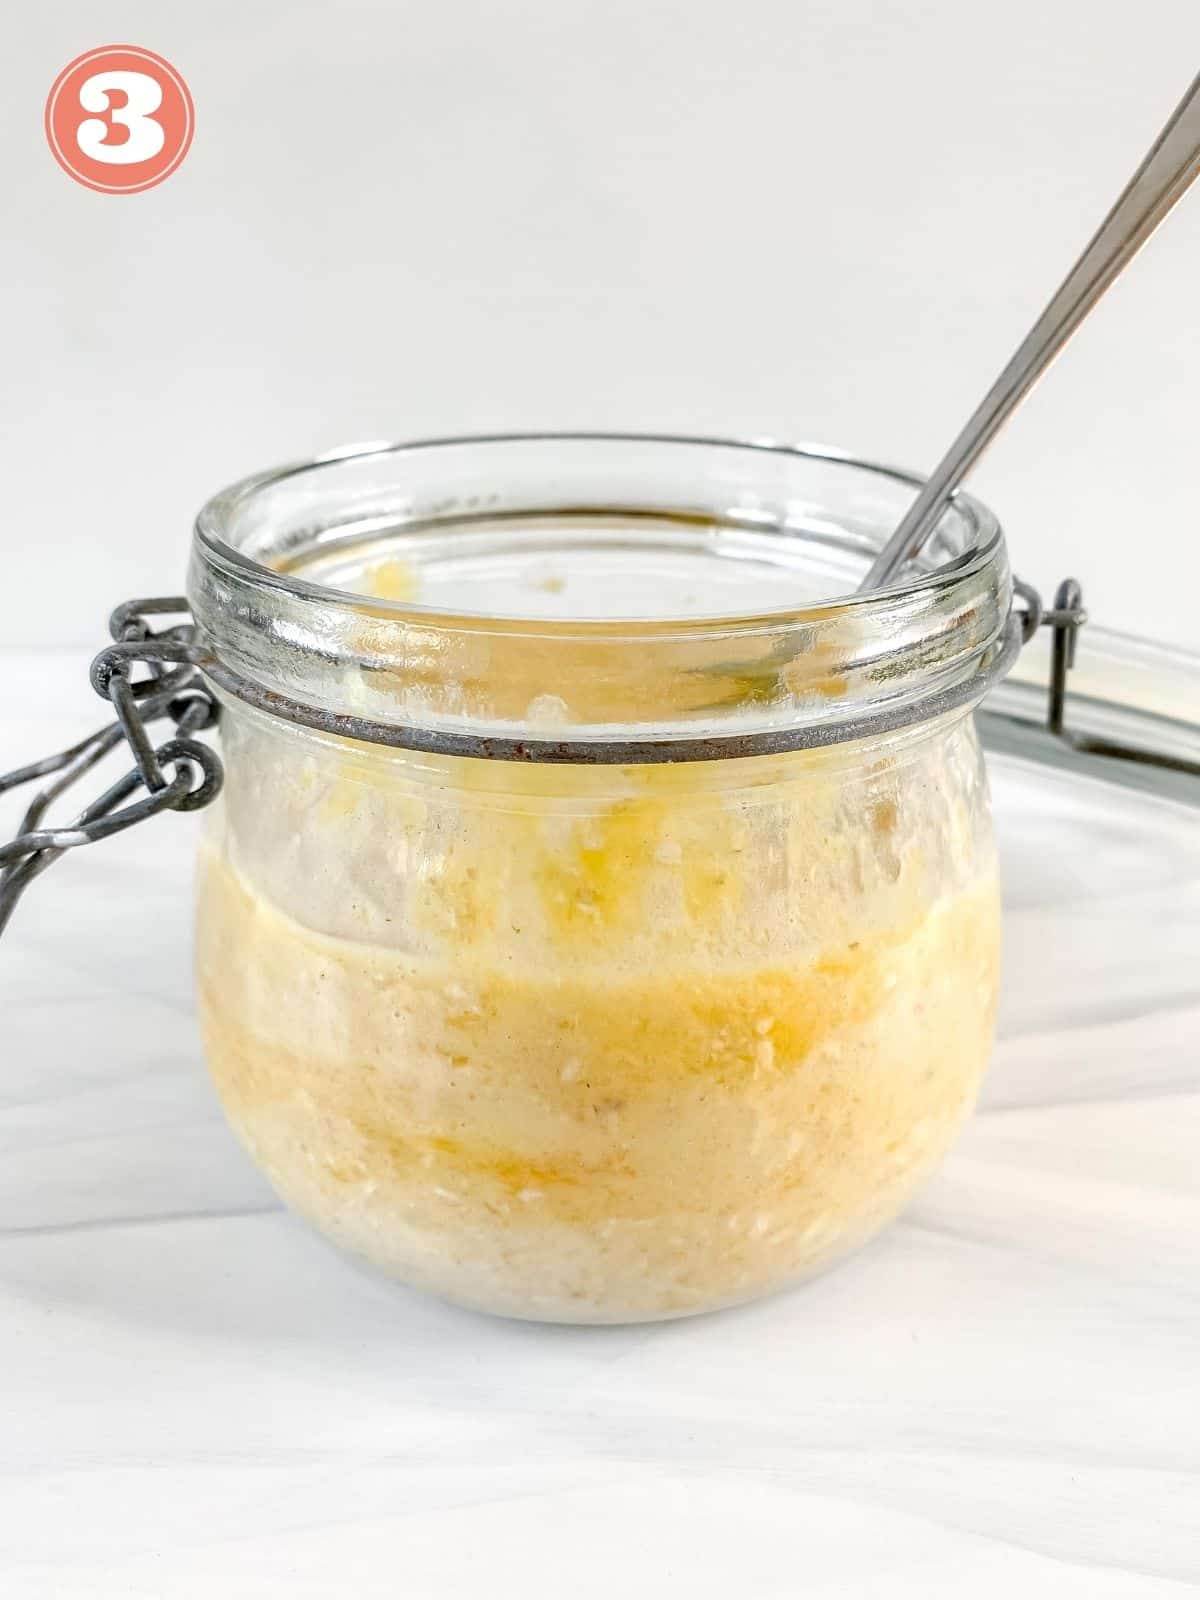 oats, milk and mango in a glass jar with a spoon in it.